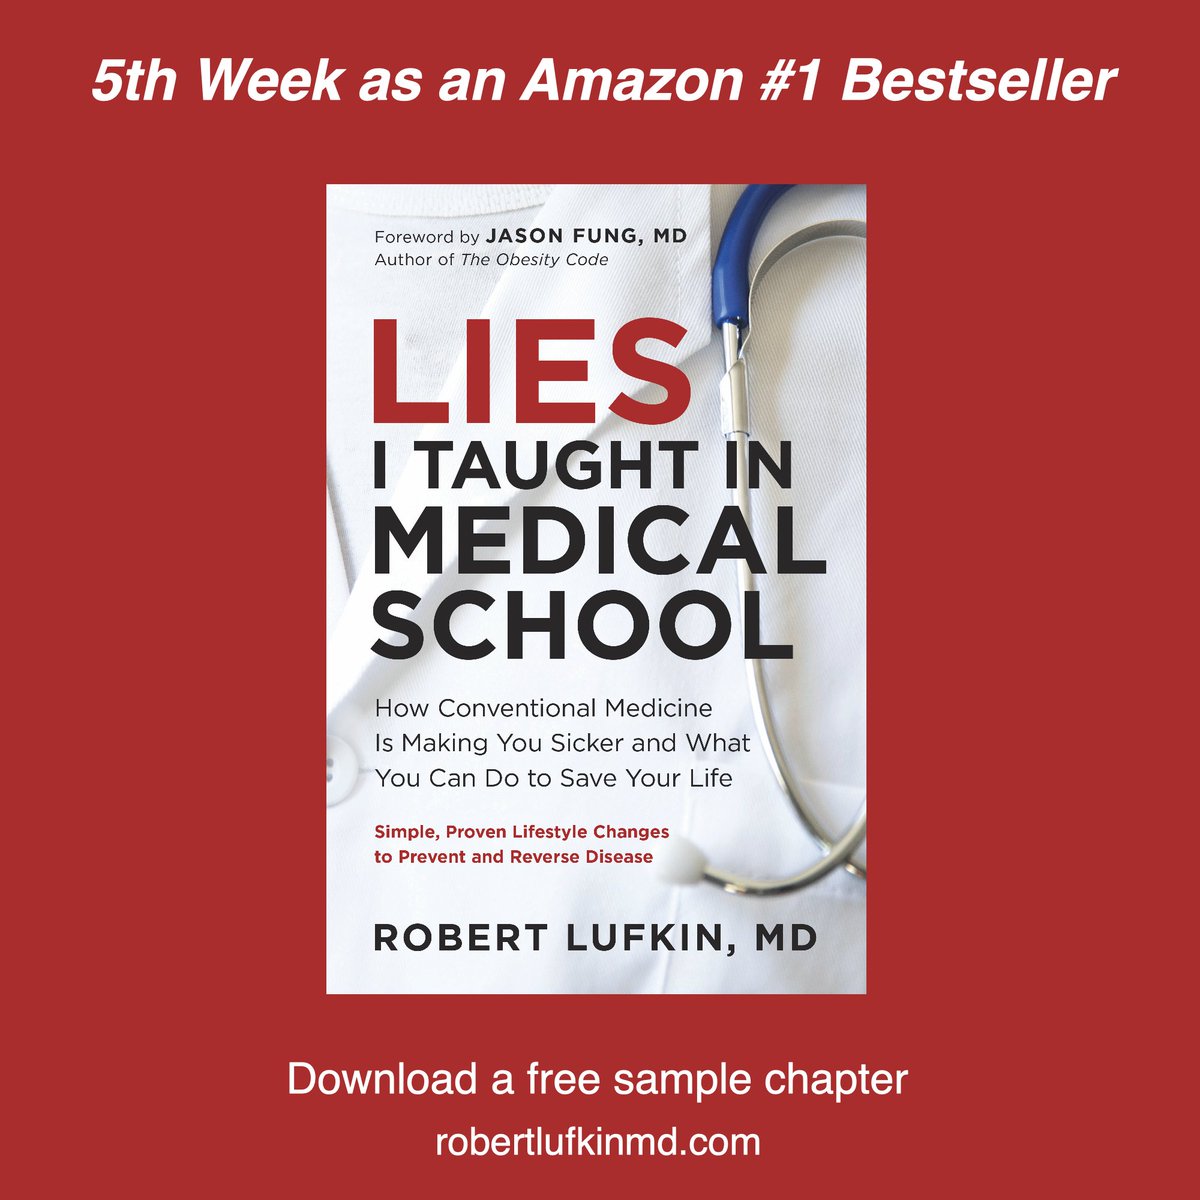 Thank you for your support! 'Lies I Taught In Medical School' Download a free sample chapter or pre-order here: robertlufkinmd.com/lies/